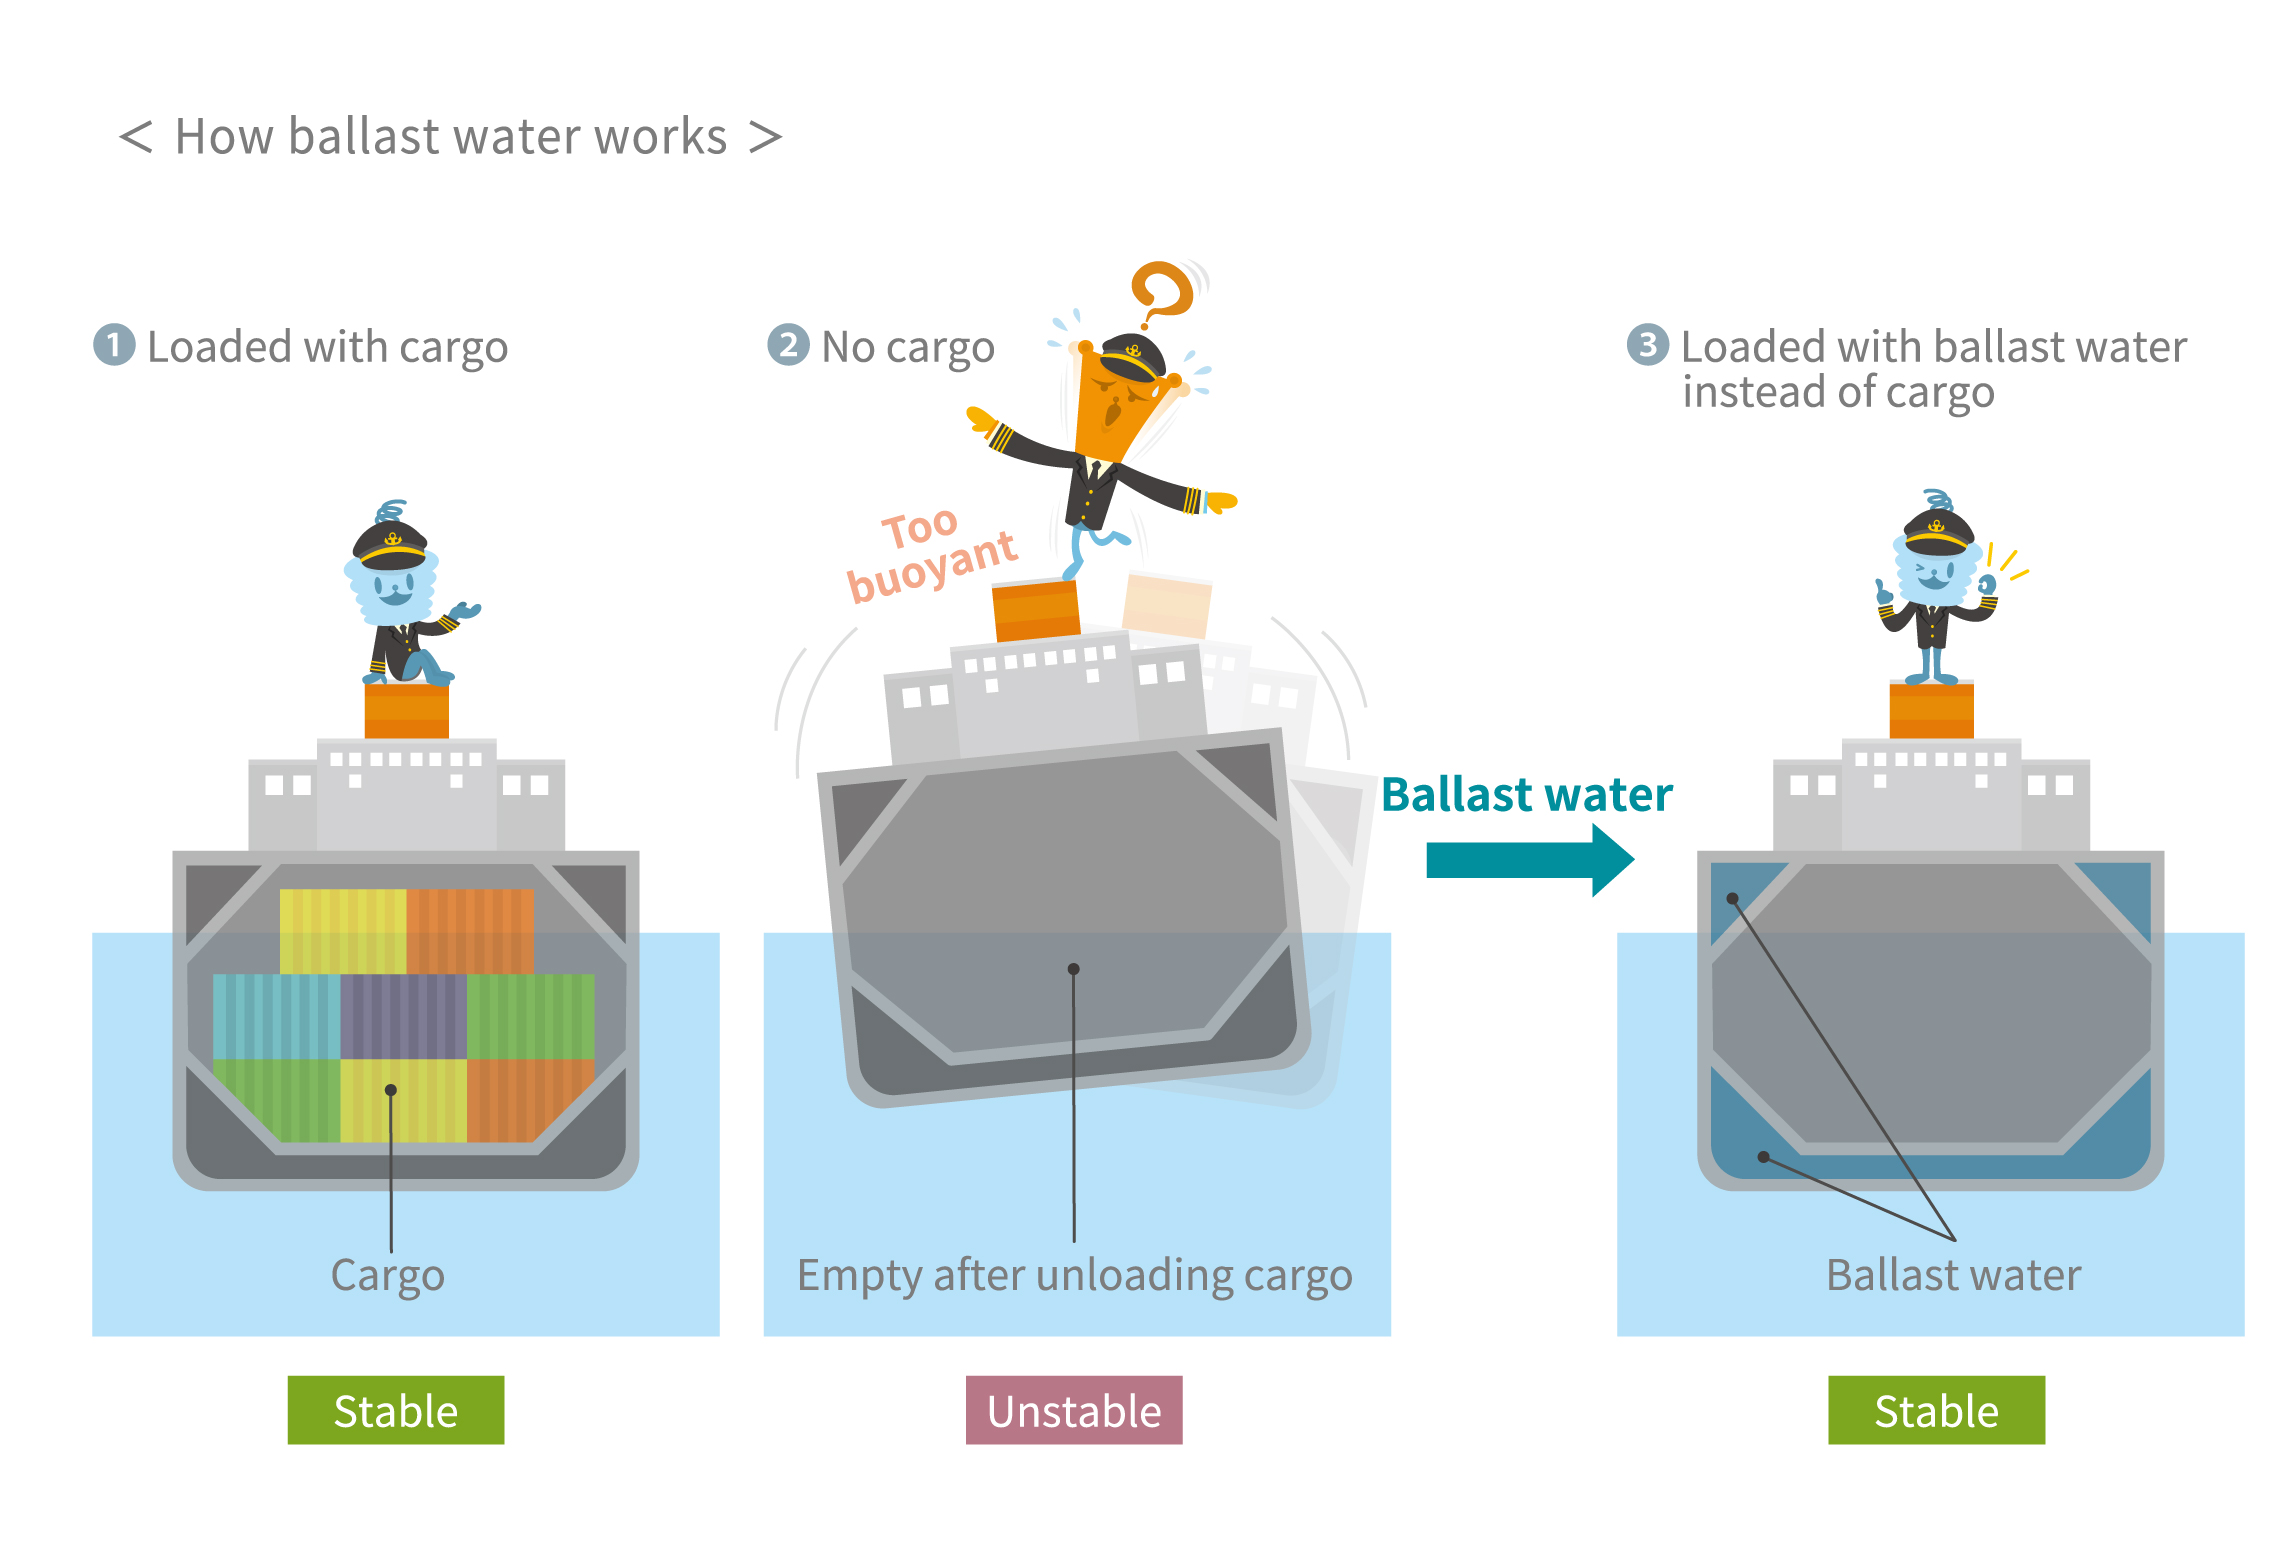 How ballast water works